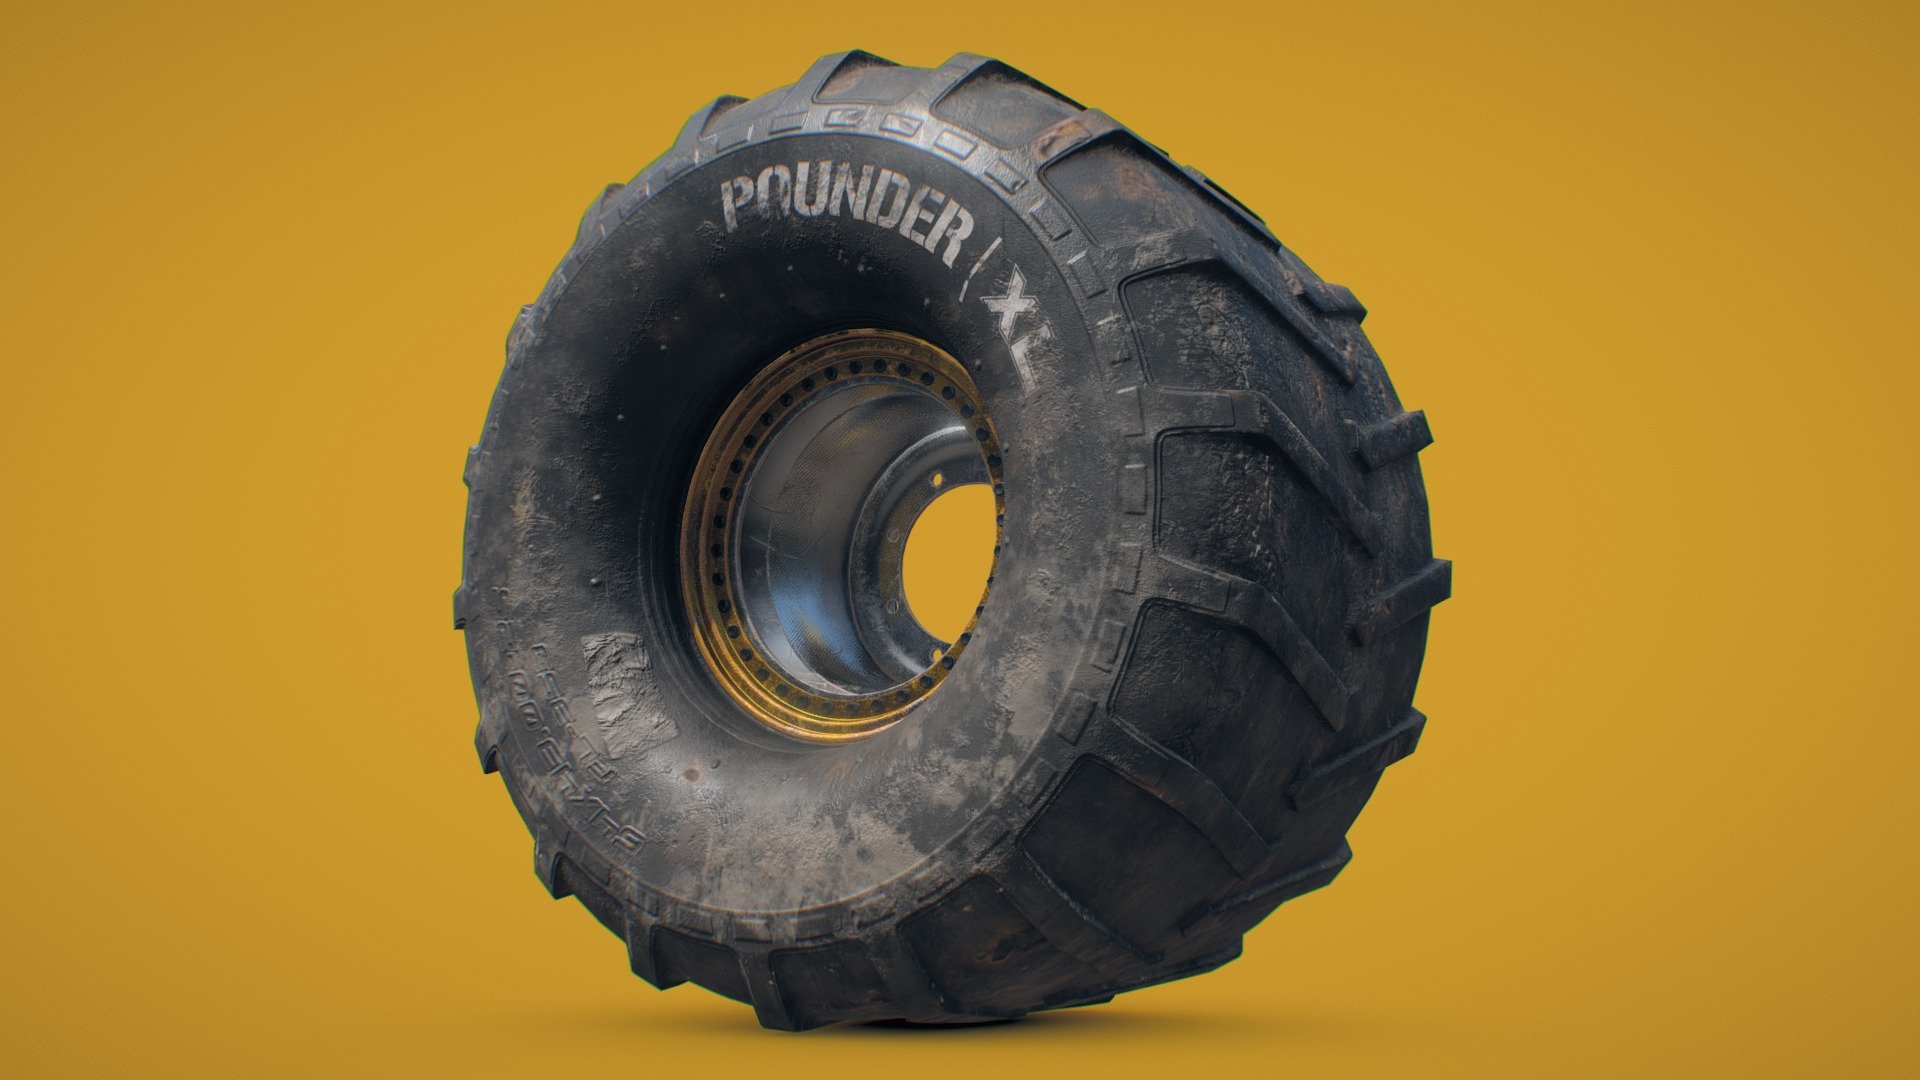 This mighty tire could help your big rig crush any scrap vehicle easily.

Just a small practice for realistic texturing 3d model